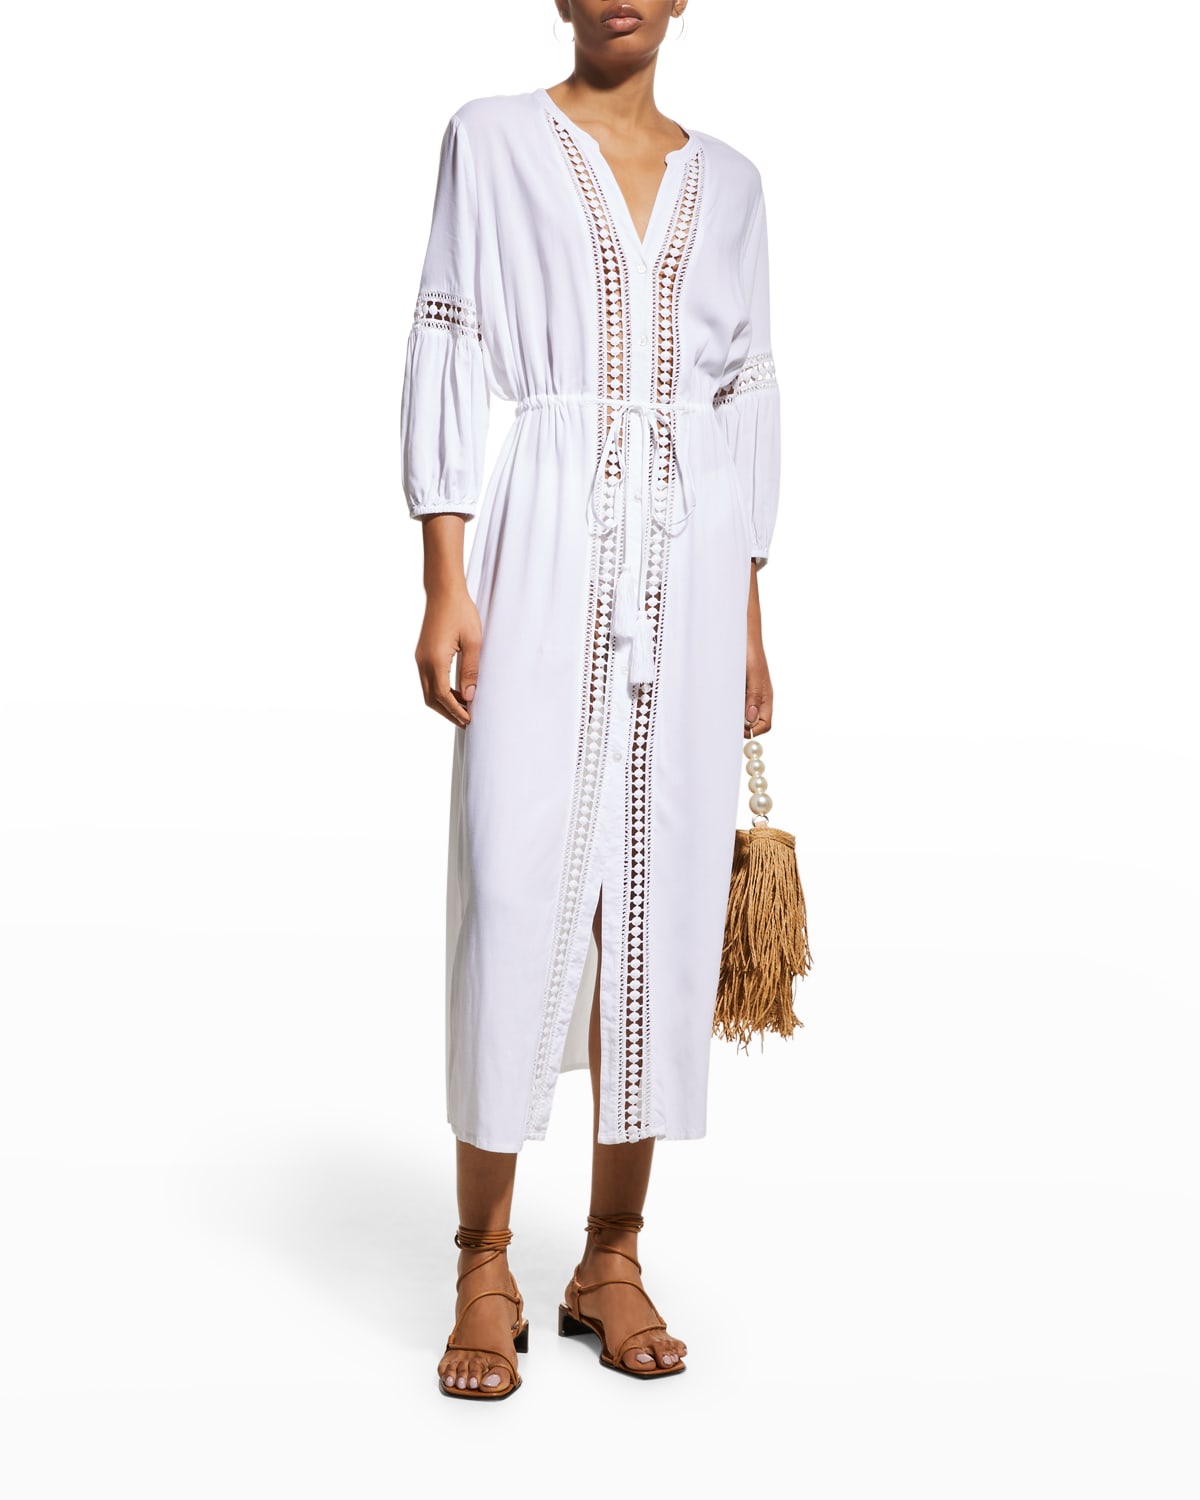 TOMMY BAHAMA SUNLACE LACE-INSET DUSTER